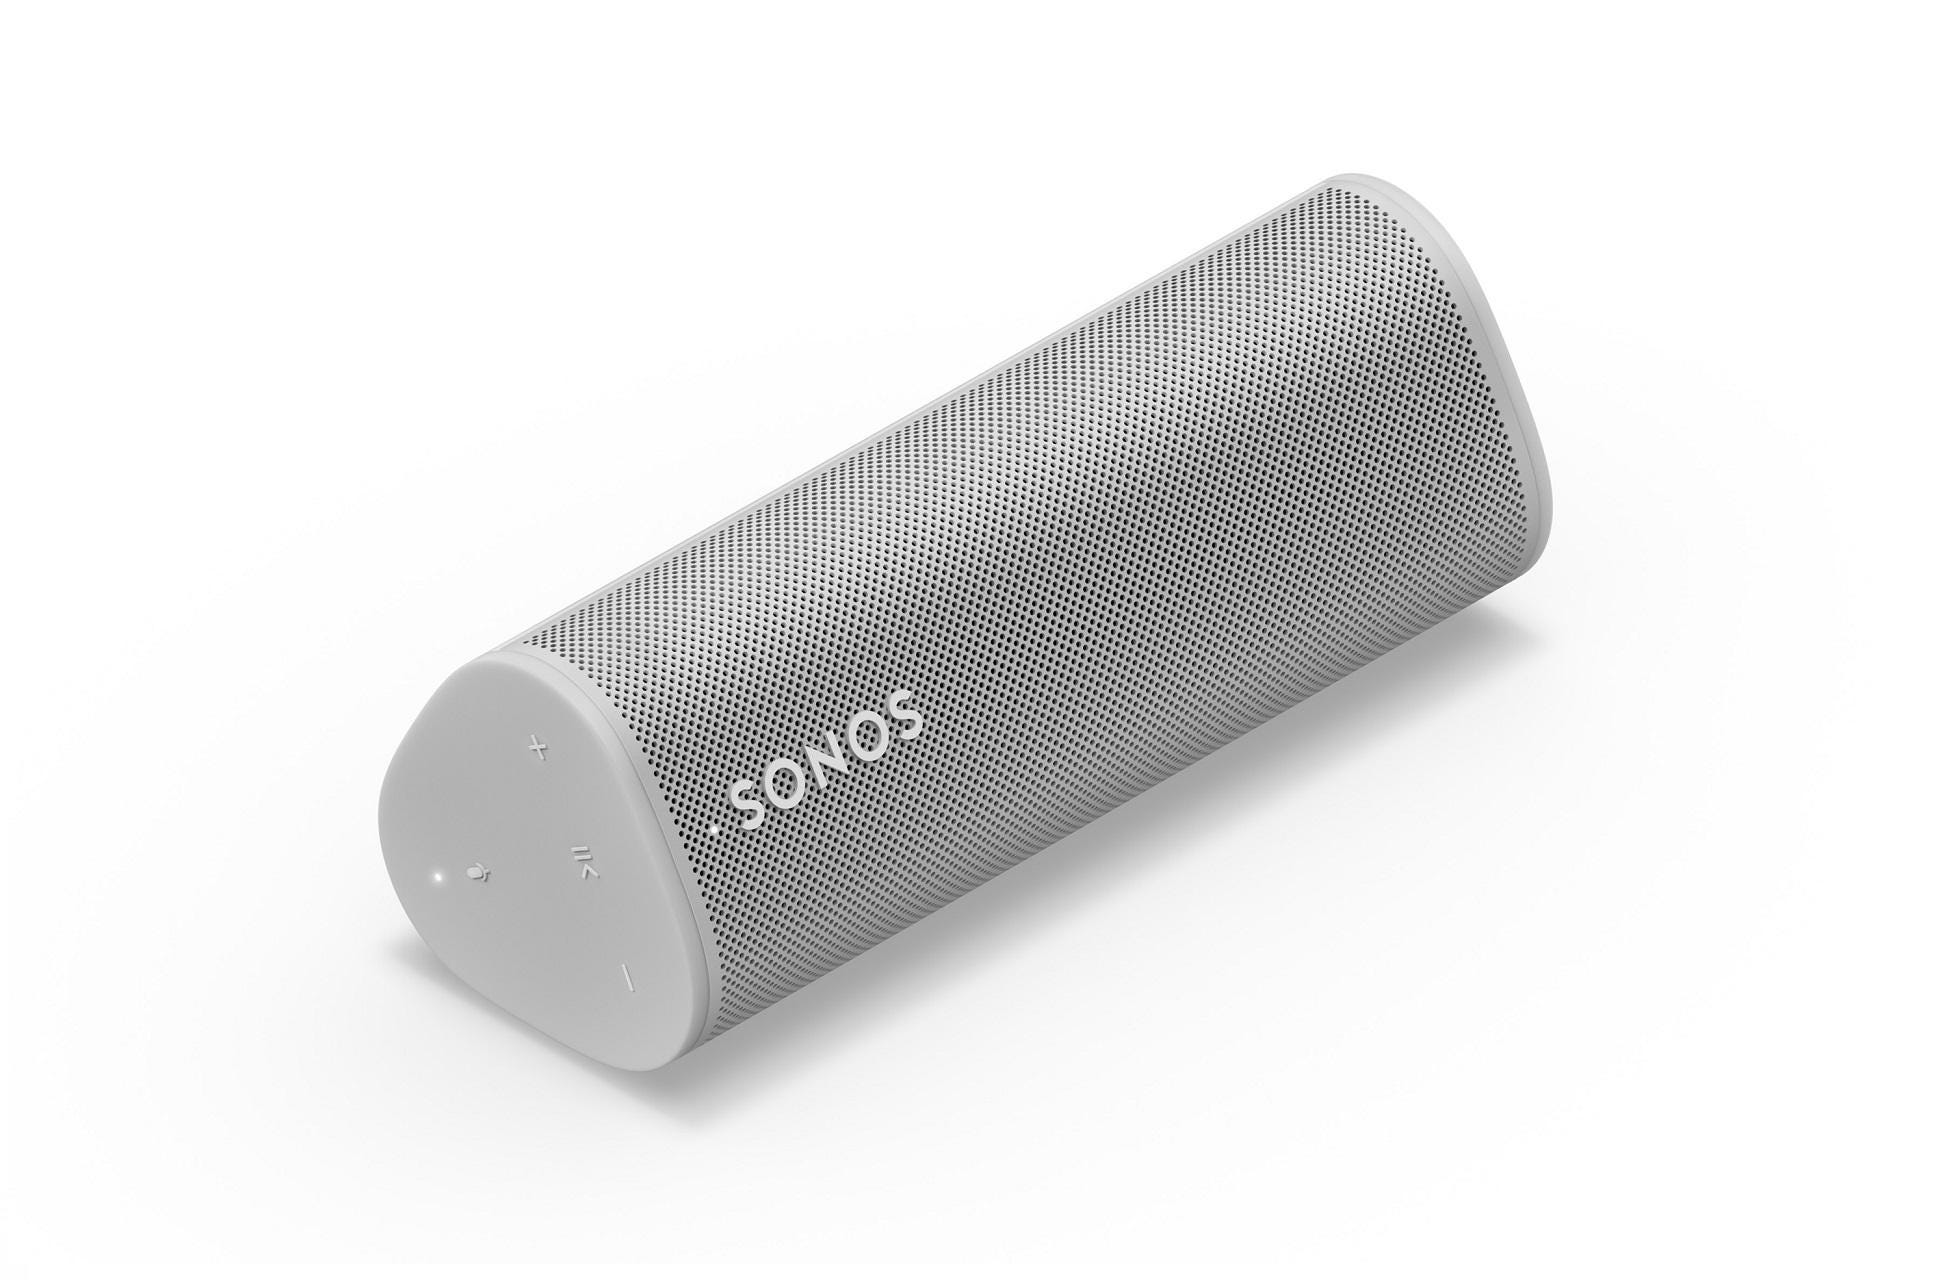 Sonos Roam review: The right speaker at the right price